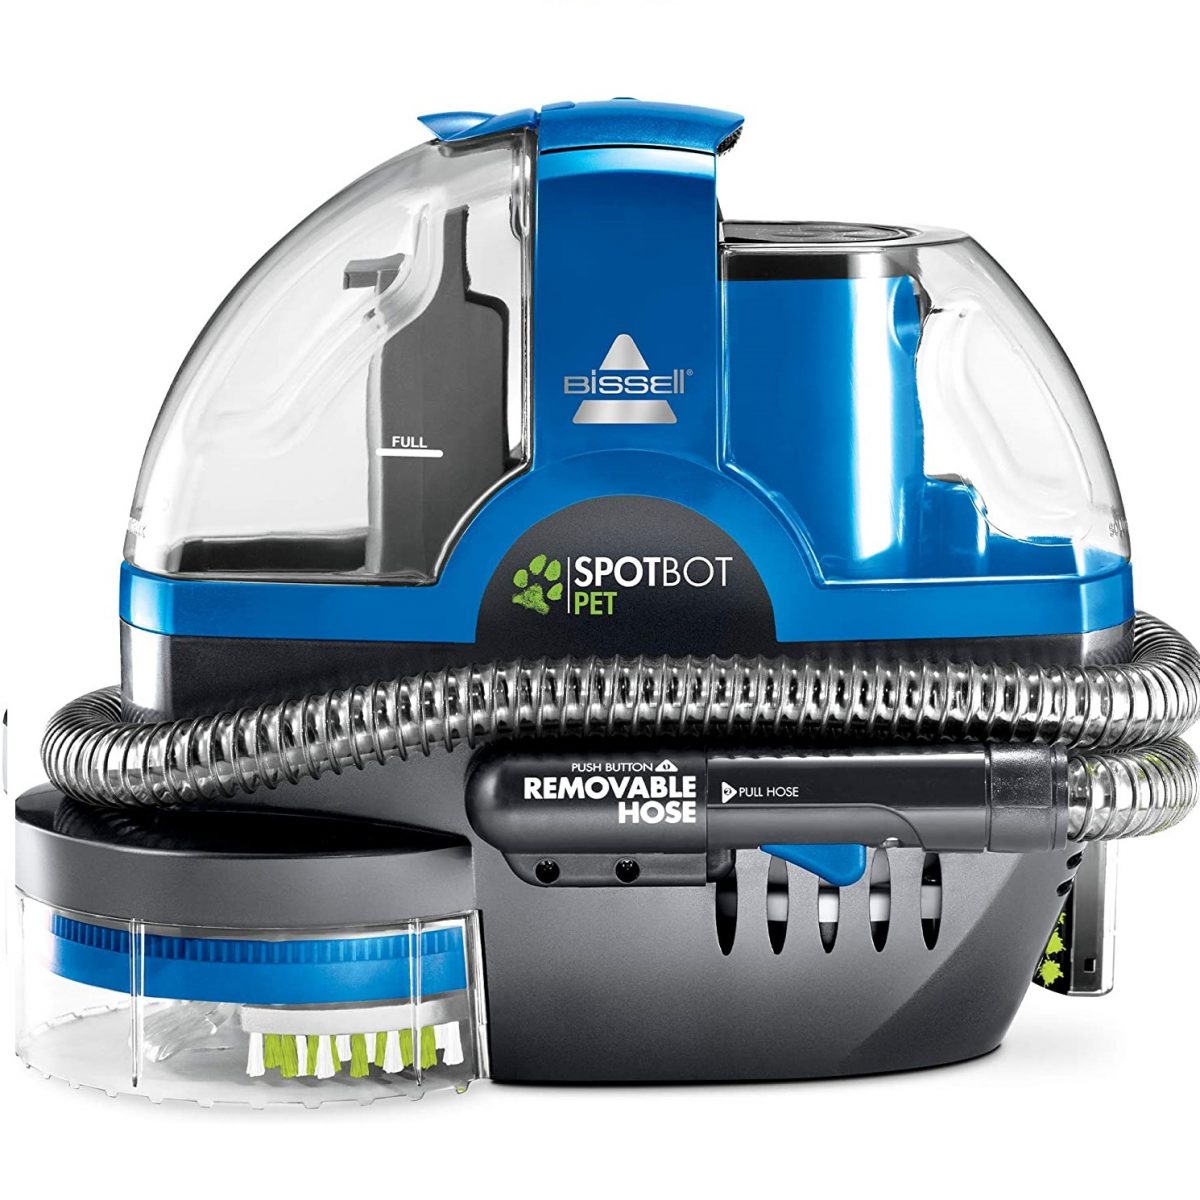 Bissell SpotBot 2117A Review in 2021 - Spotcarpetcleaners